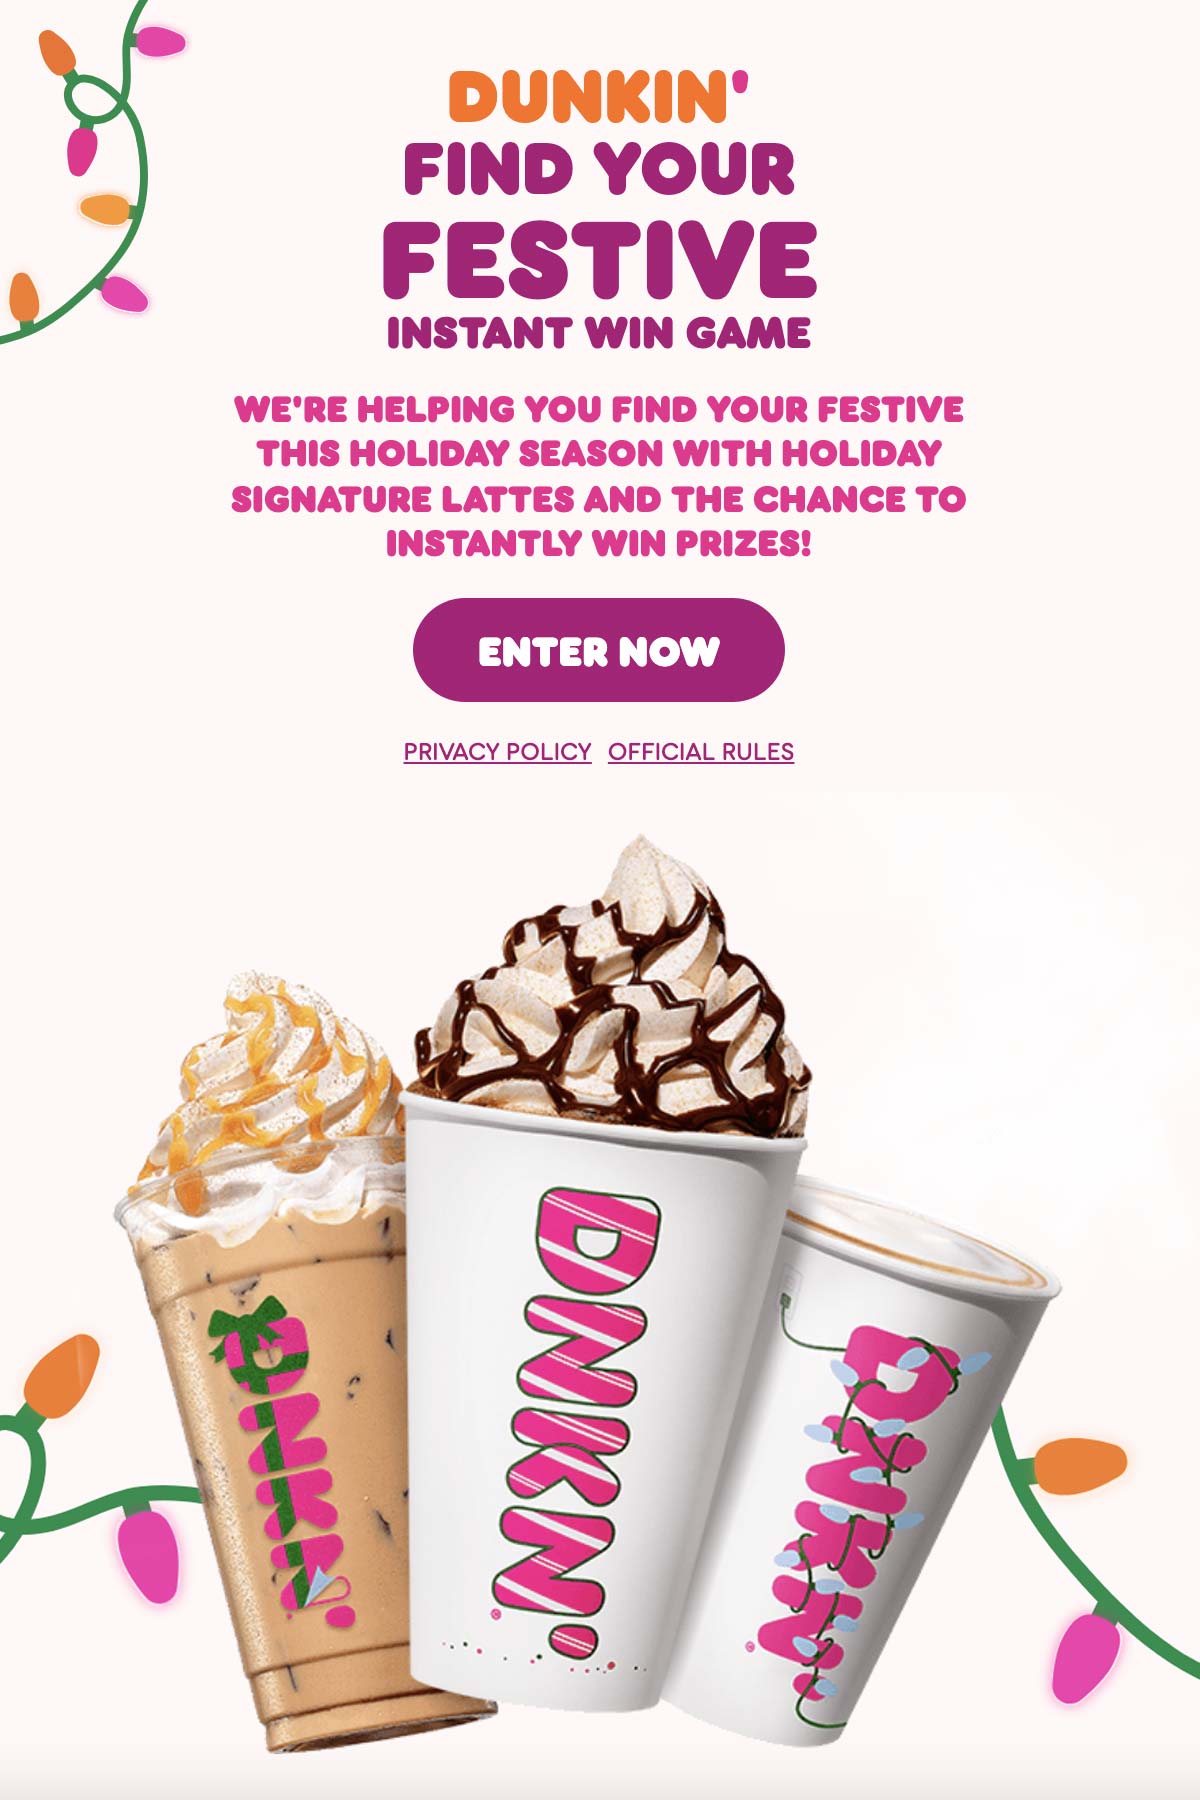 Dunkin' Find Your Festive Instant Win Game 2021.